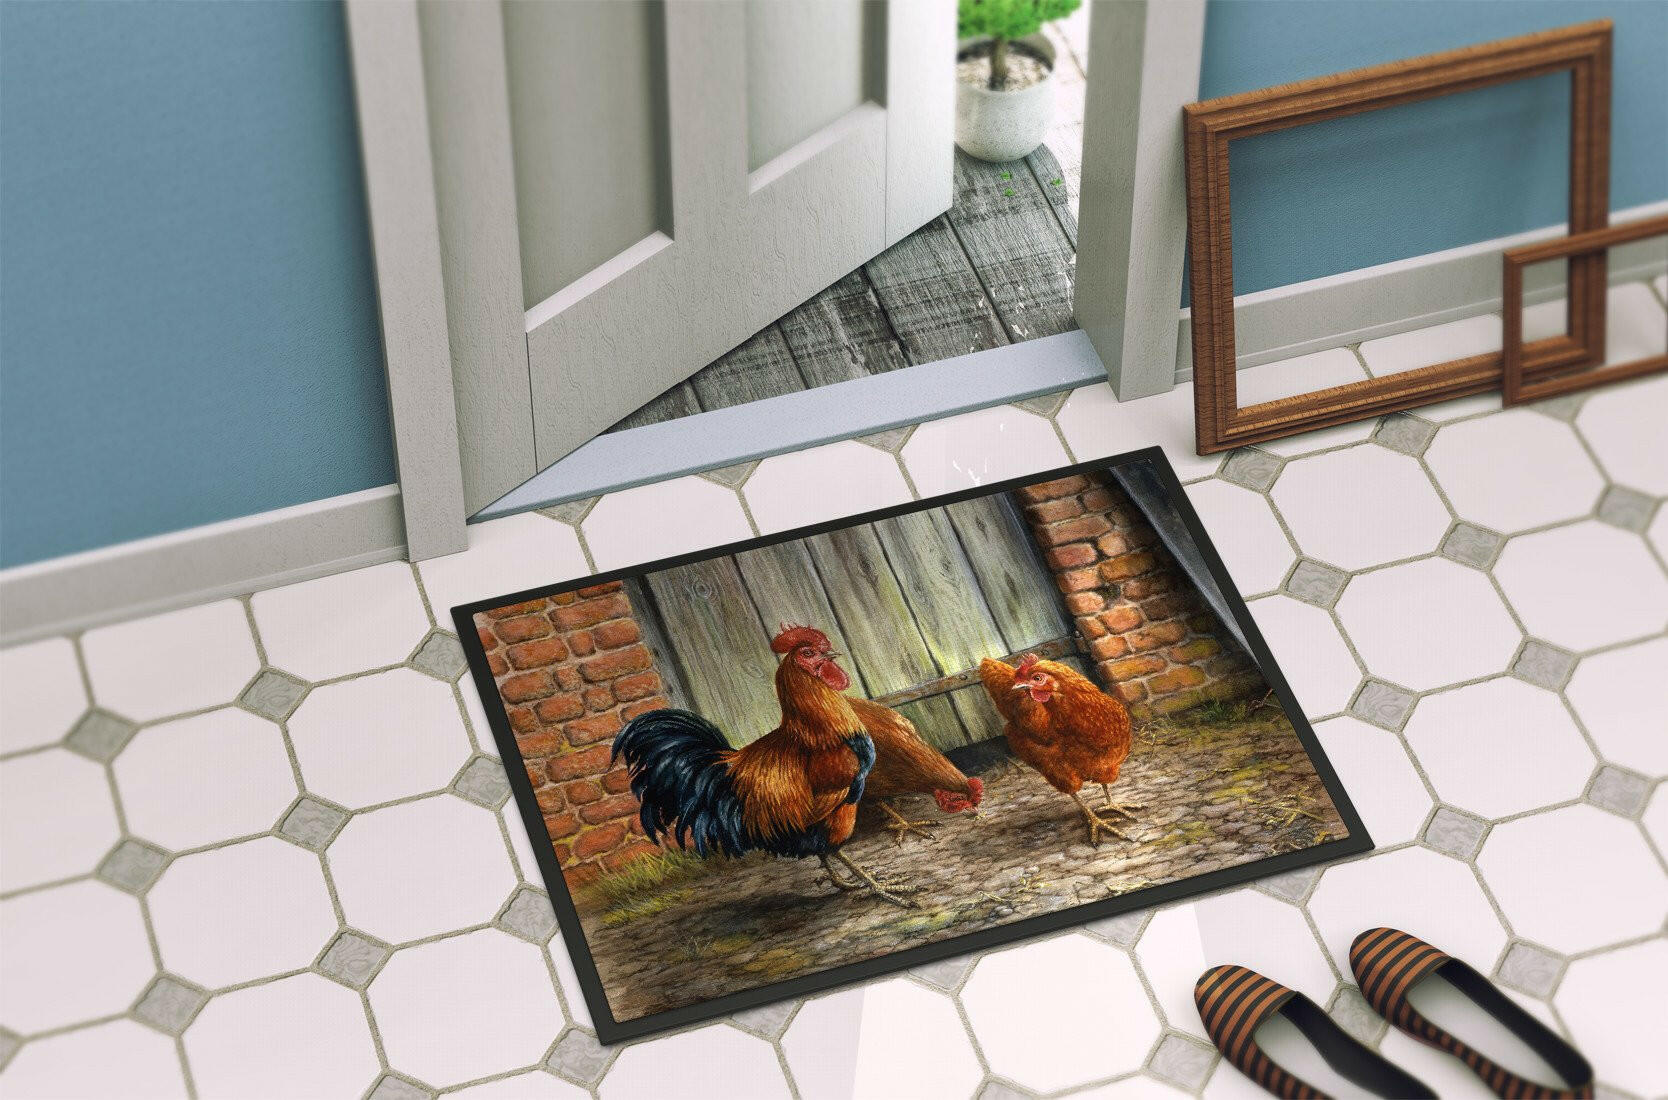 Rooster and Chickens by Daphne Baxter Indoor or Outdoor Mat 24x36 BDBA0056JMAT - the-store.com